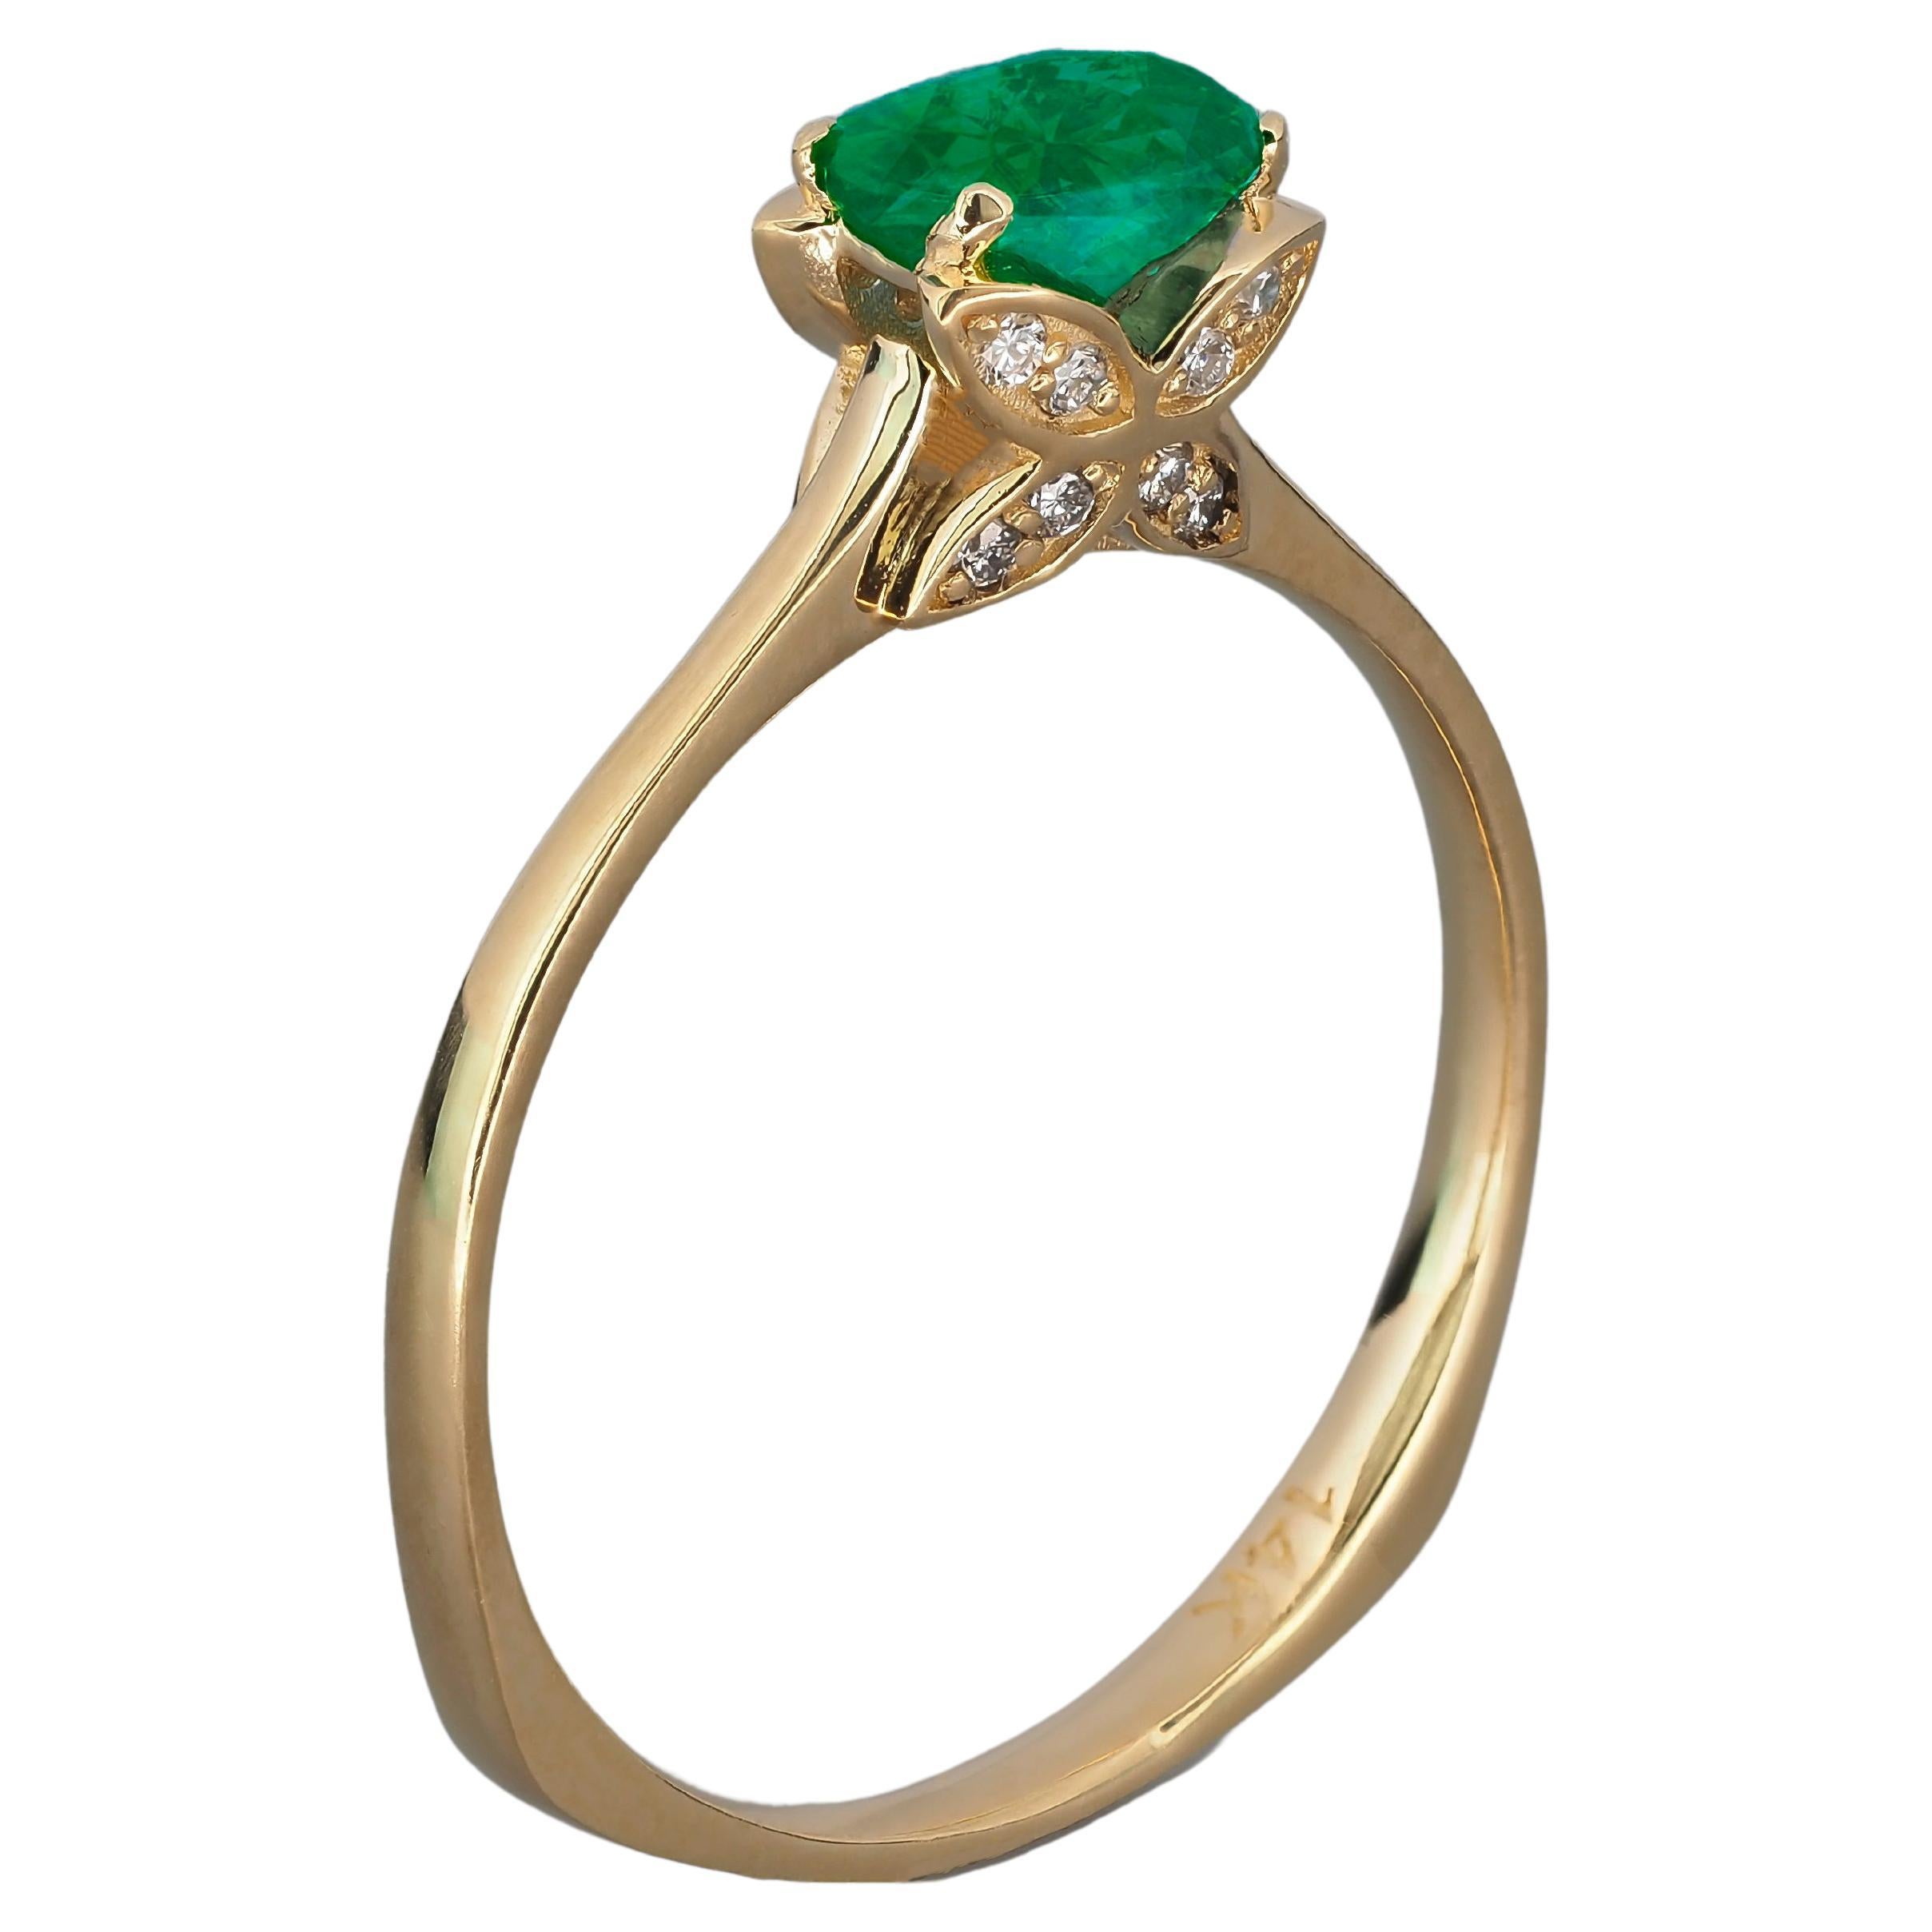 For Sale:  Emerald and Diamonds 14k gold ring. Buterfly gold ring!